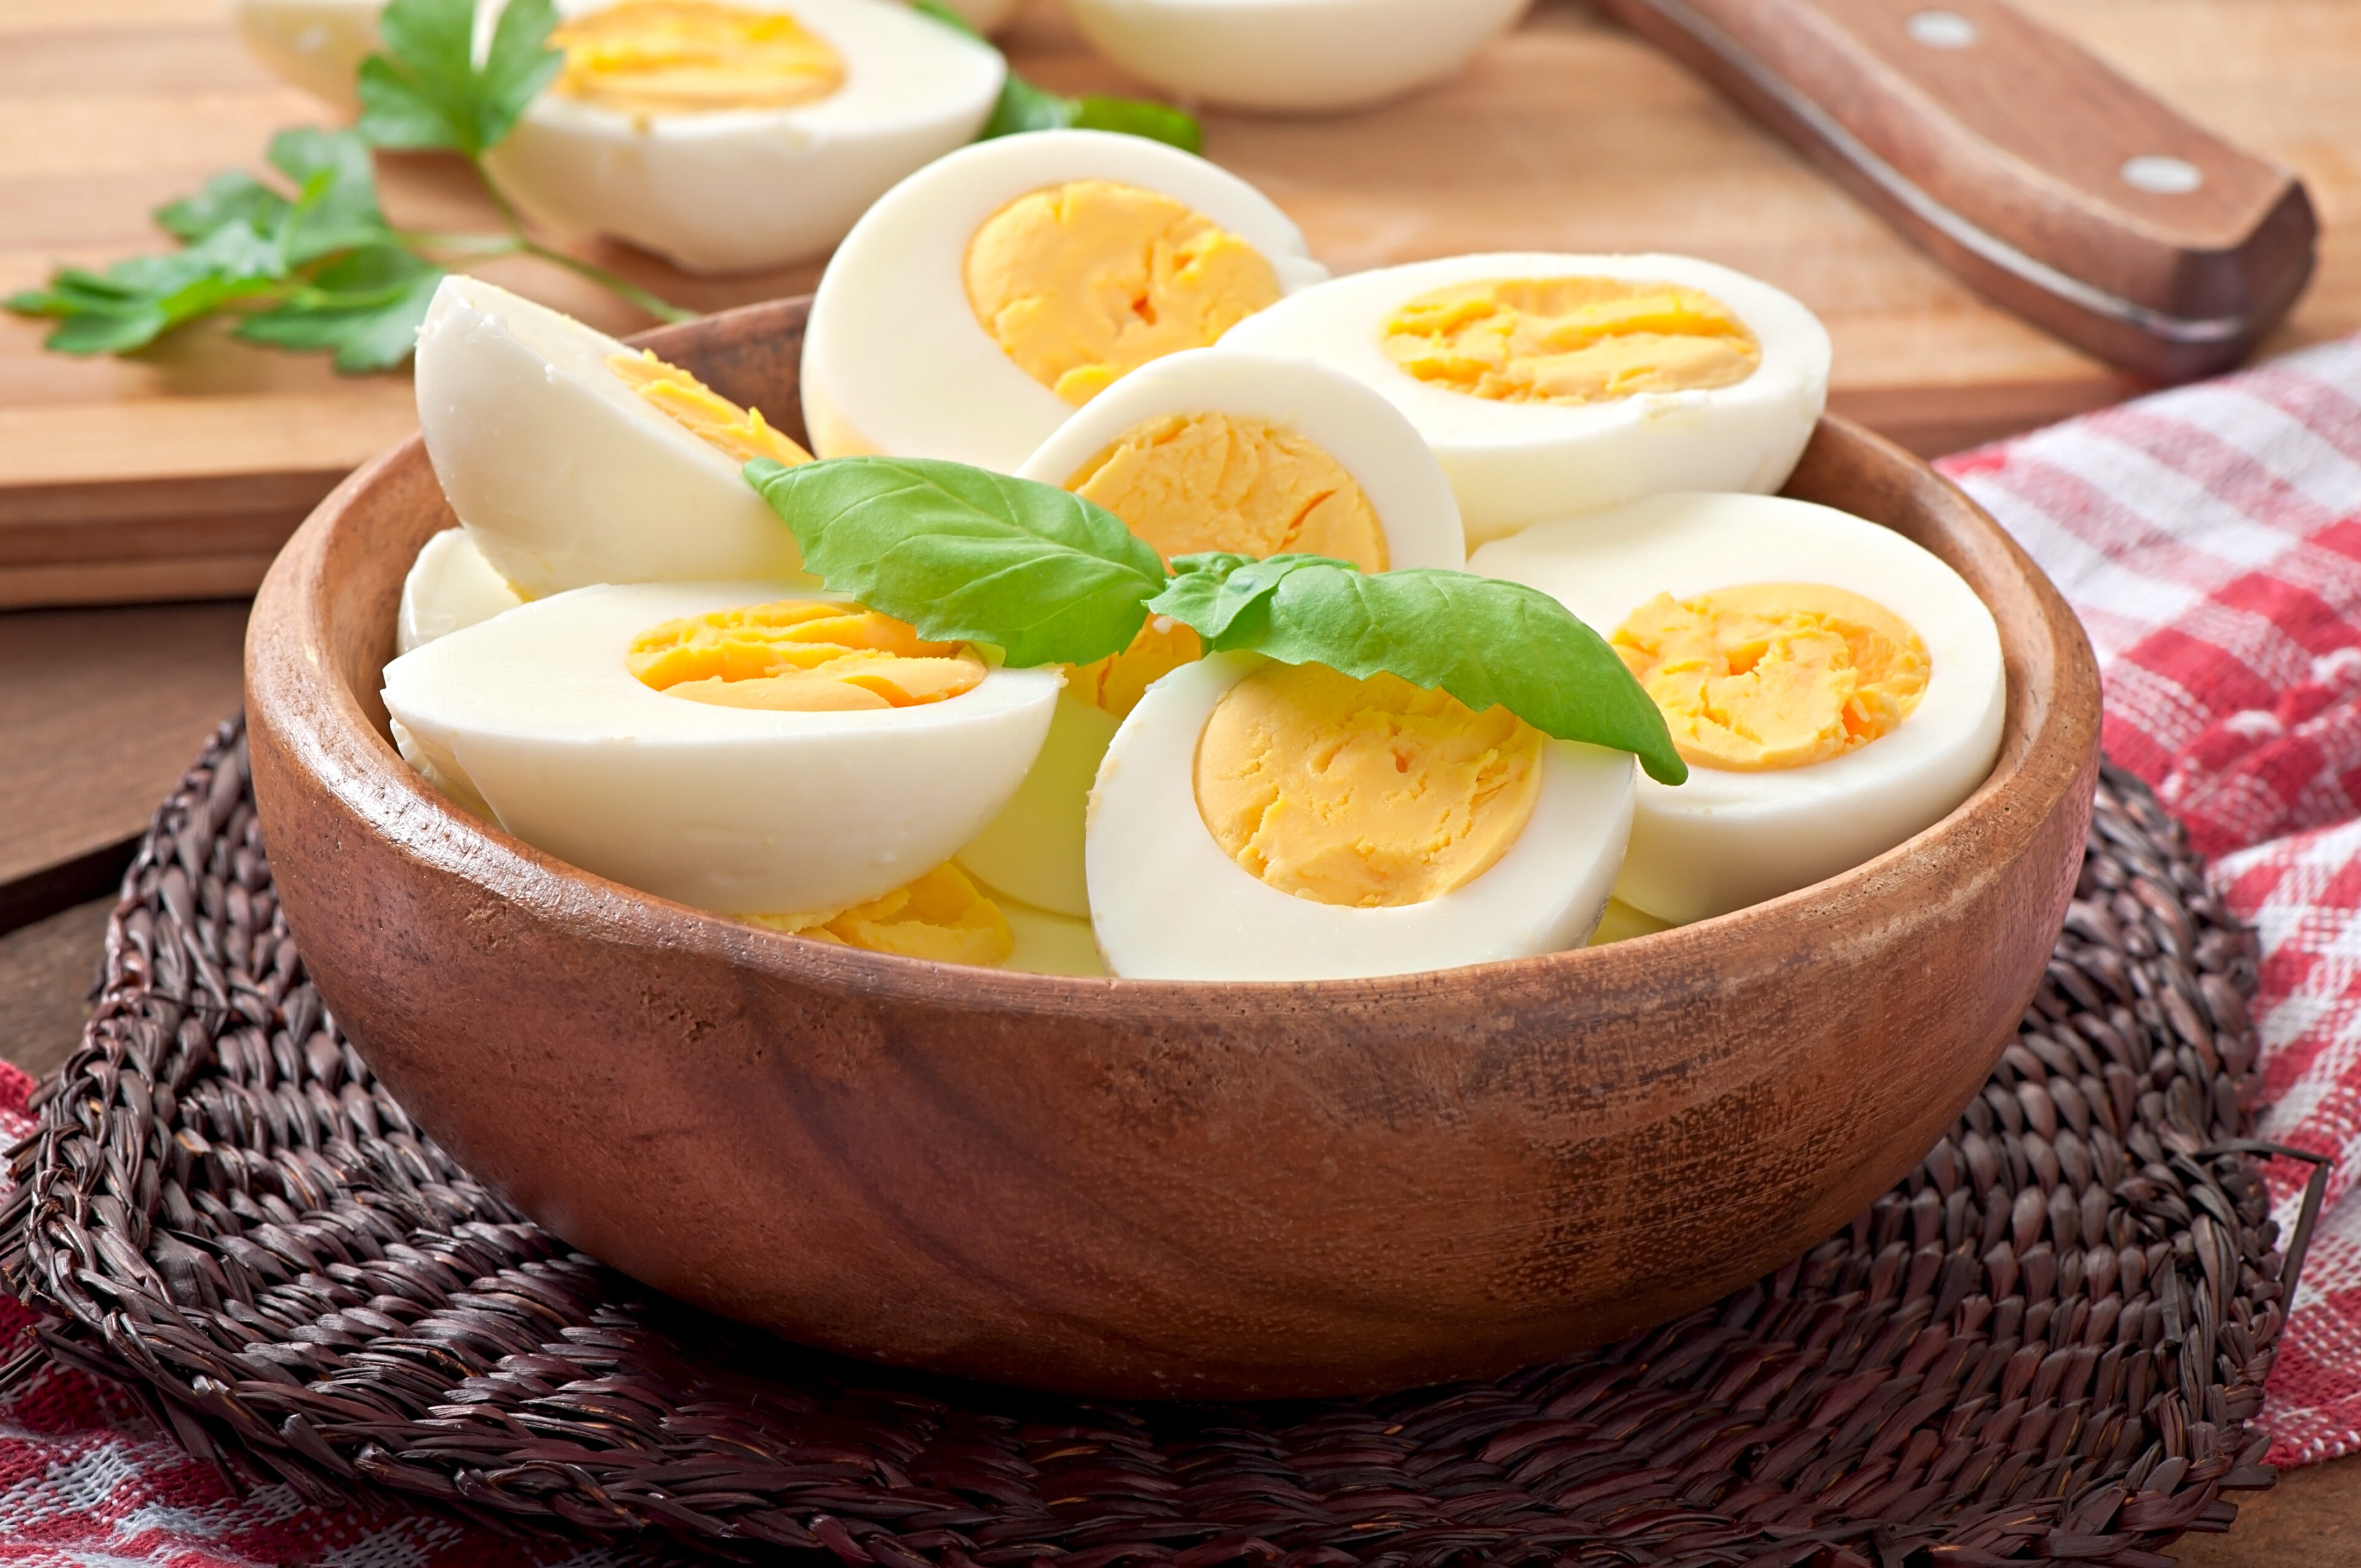 Hard-boiled eggs in a bowl garnished with parsley leaves